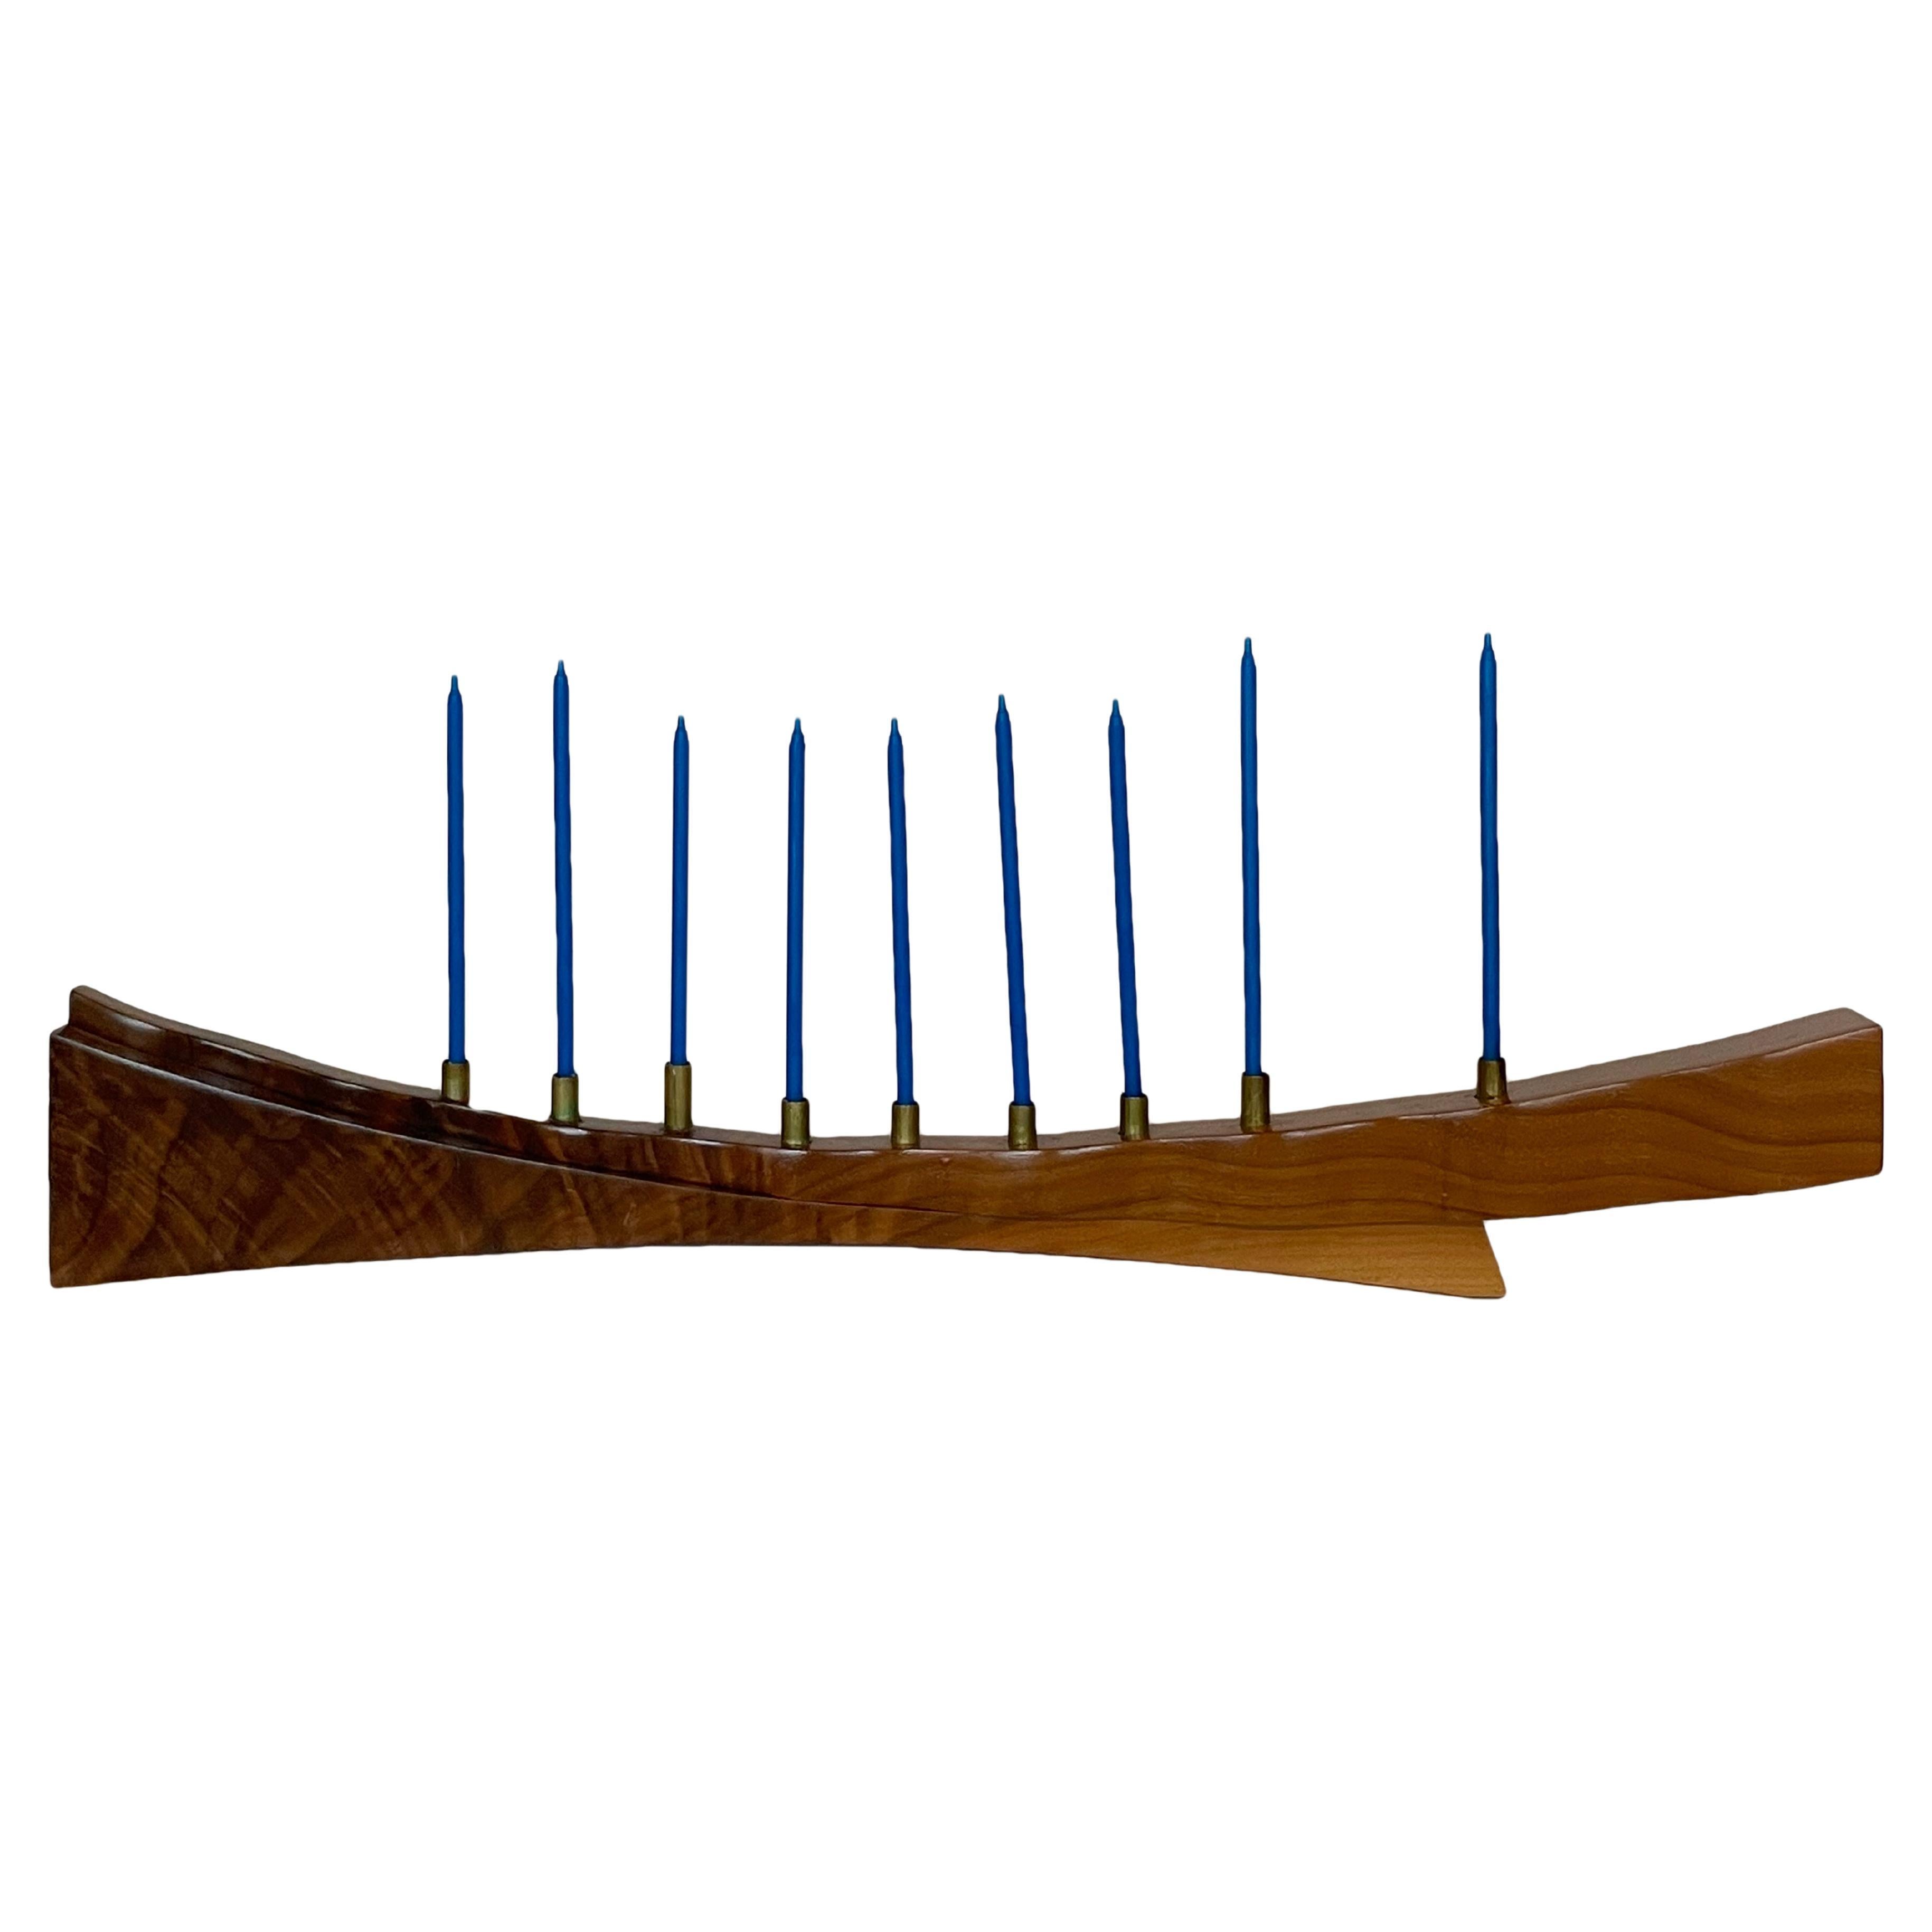 Late 20th Century American Studio Craft Carved Wood Menorah by, Charlie B. Cobb For Sale